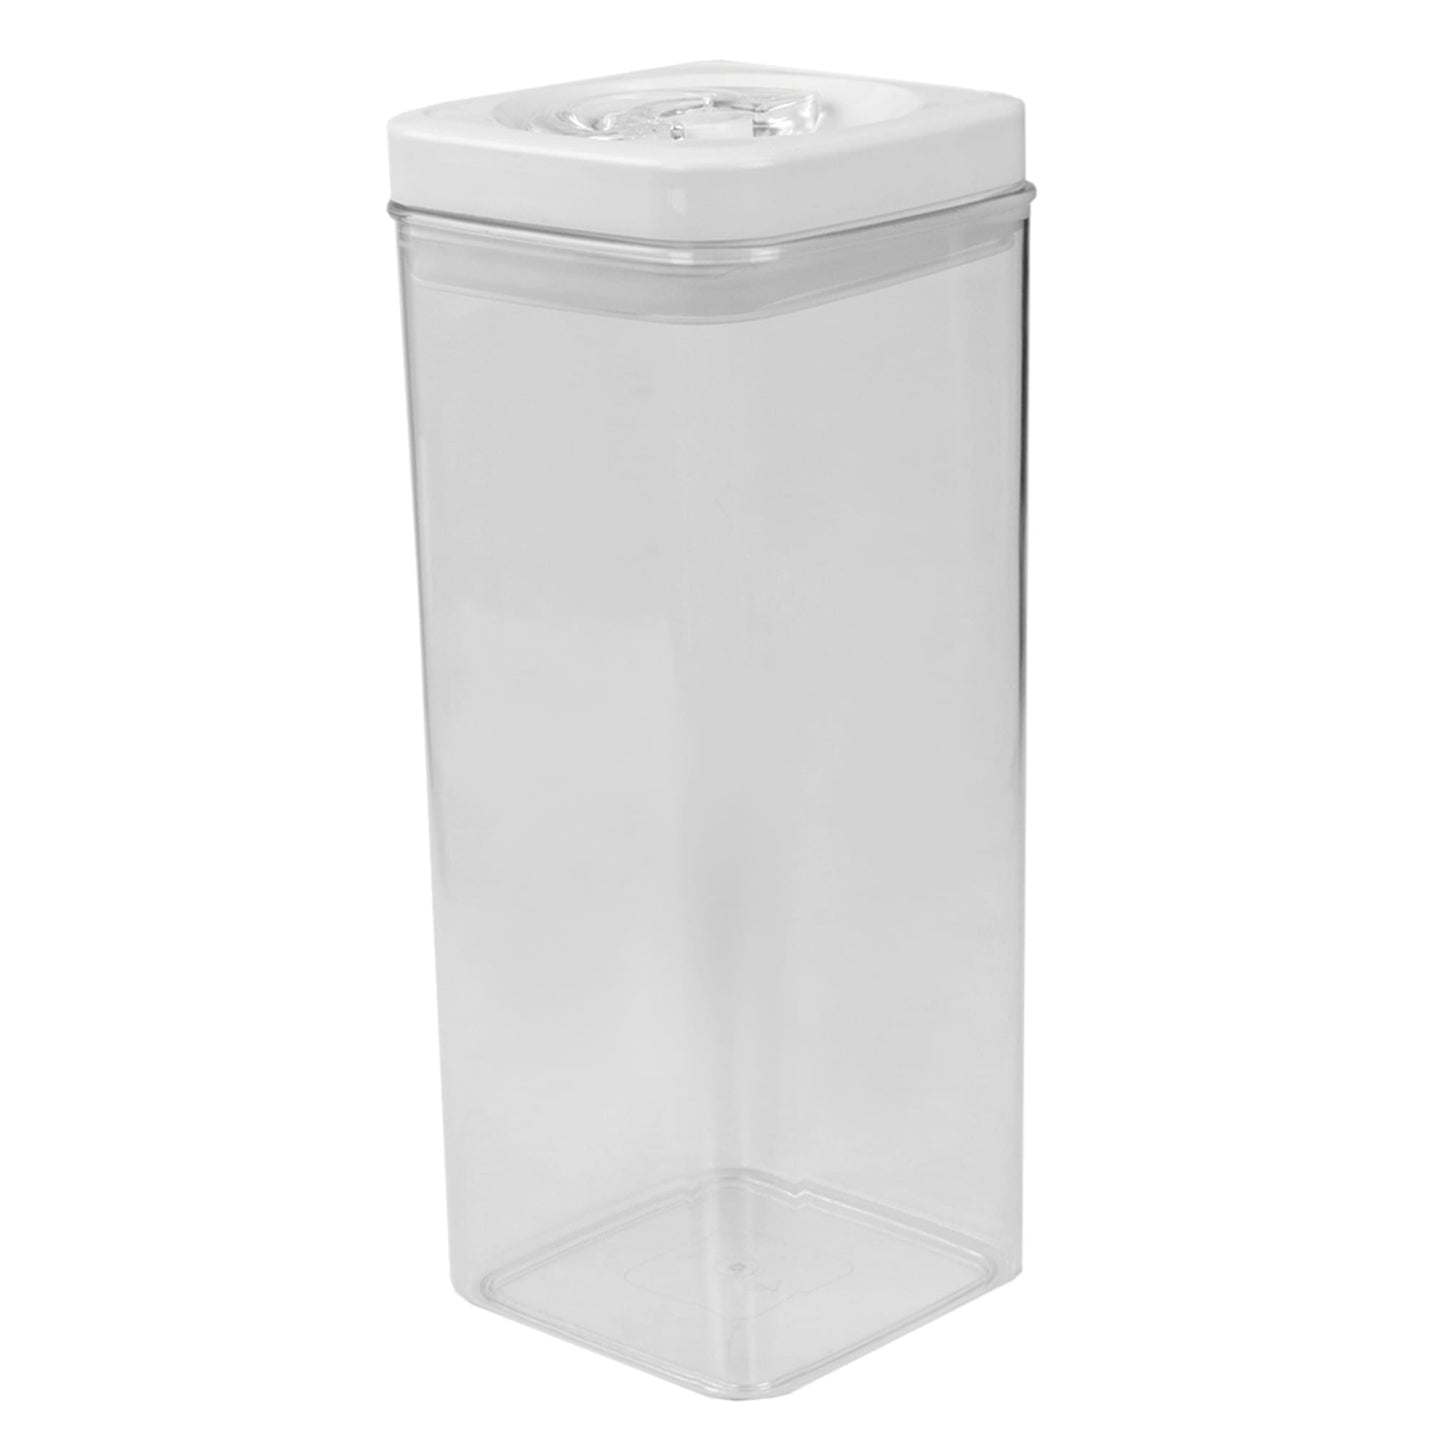 3.1 Liter Twist 'N Lock Air-Tight Square Plastic Canister, White